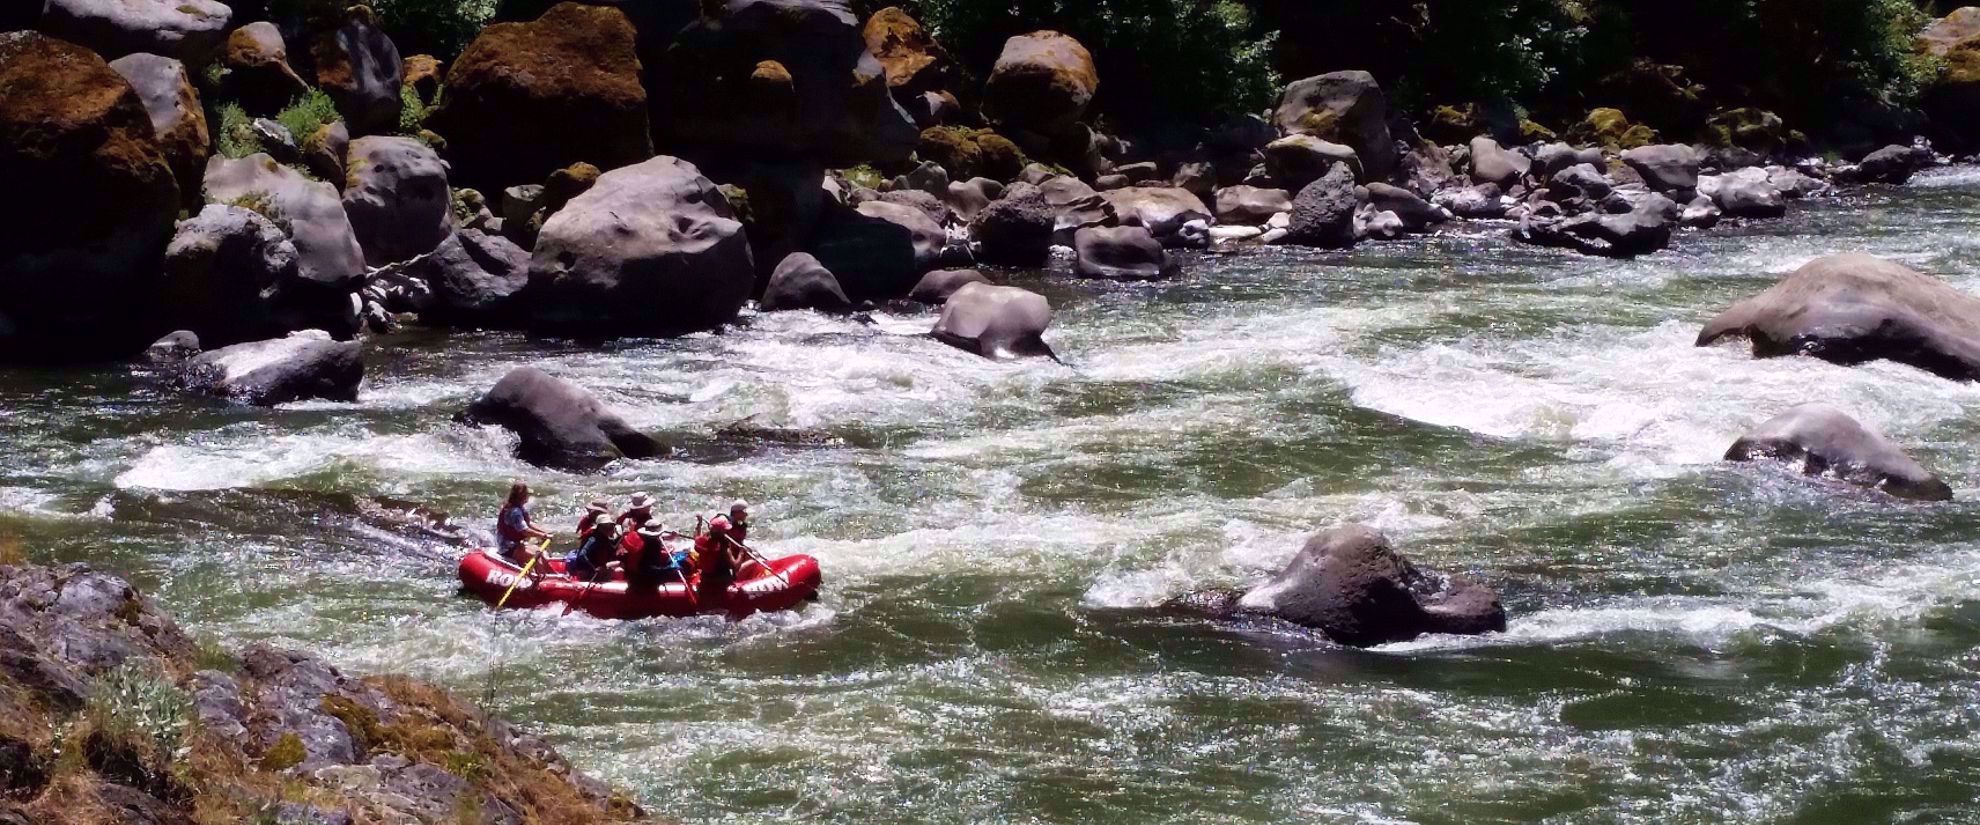 rafting through rogue river rapids with rocks